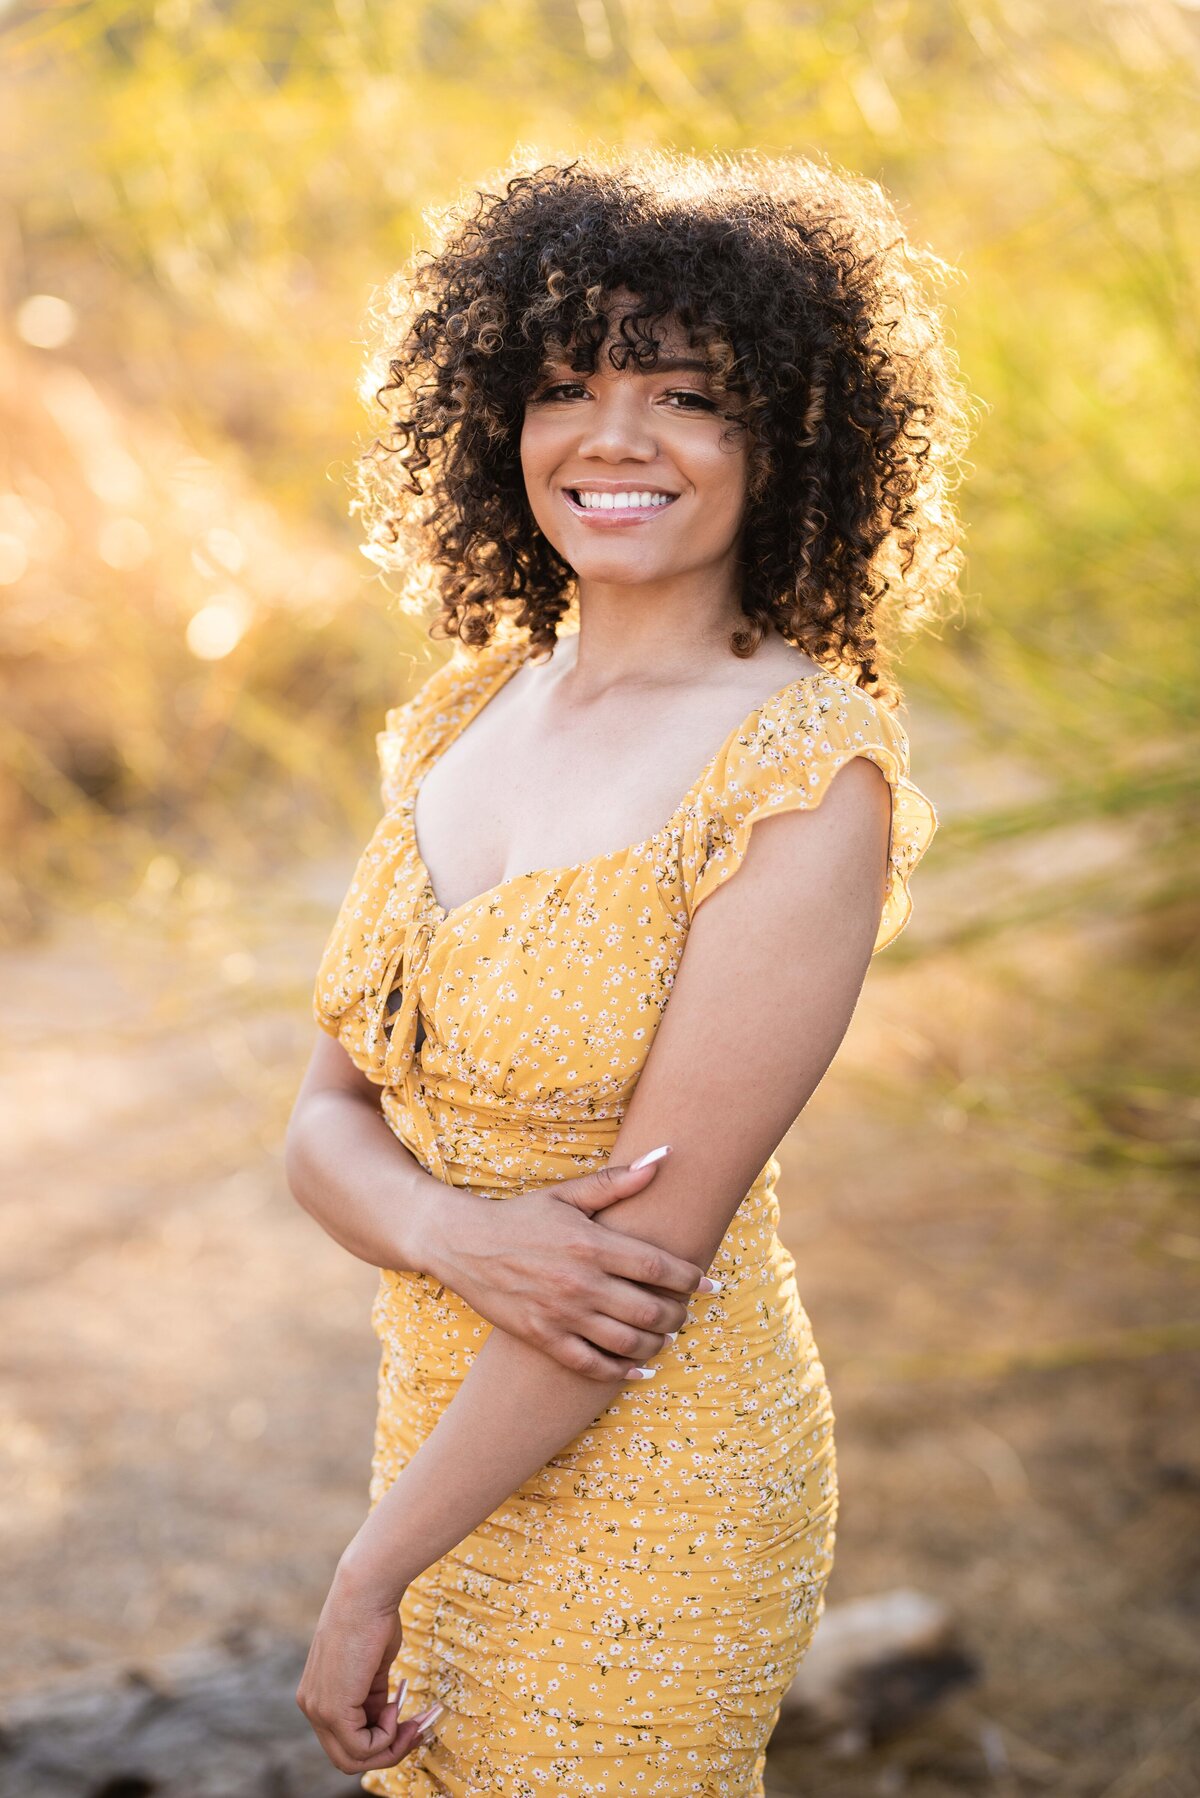 Senior girl with big curly hair and yellow dress